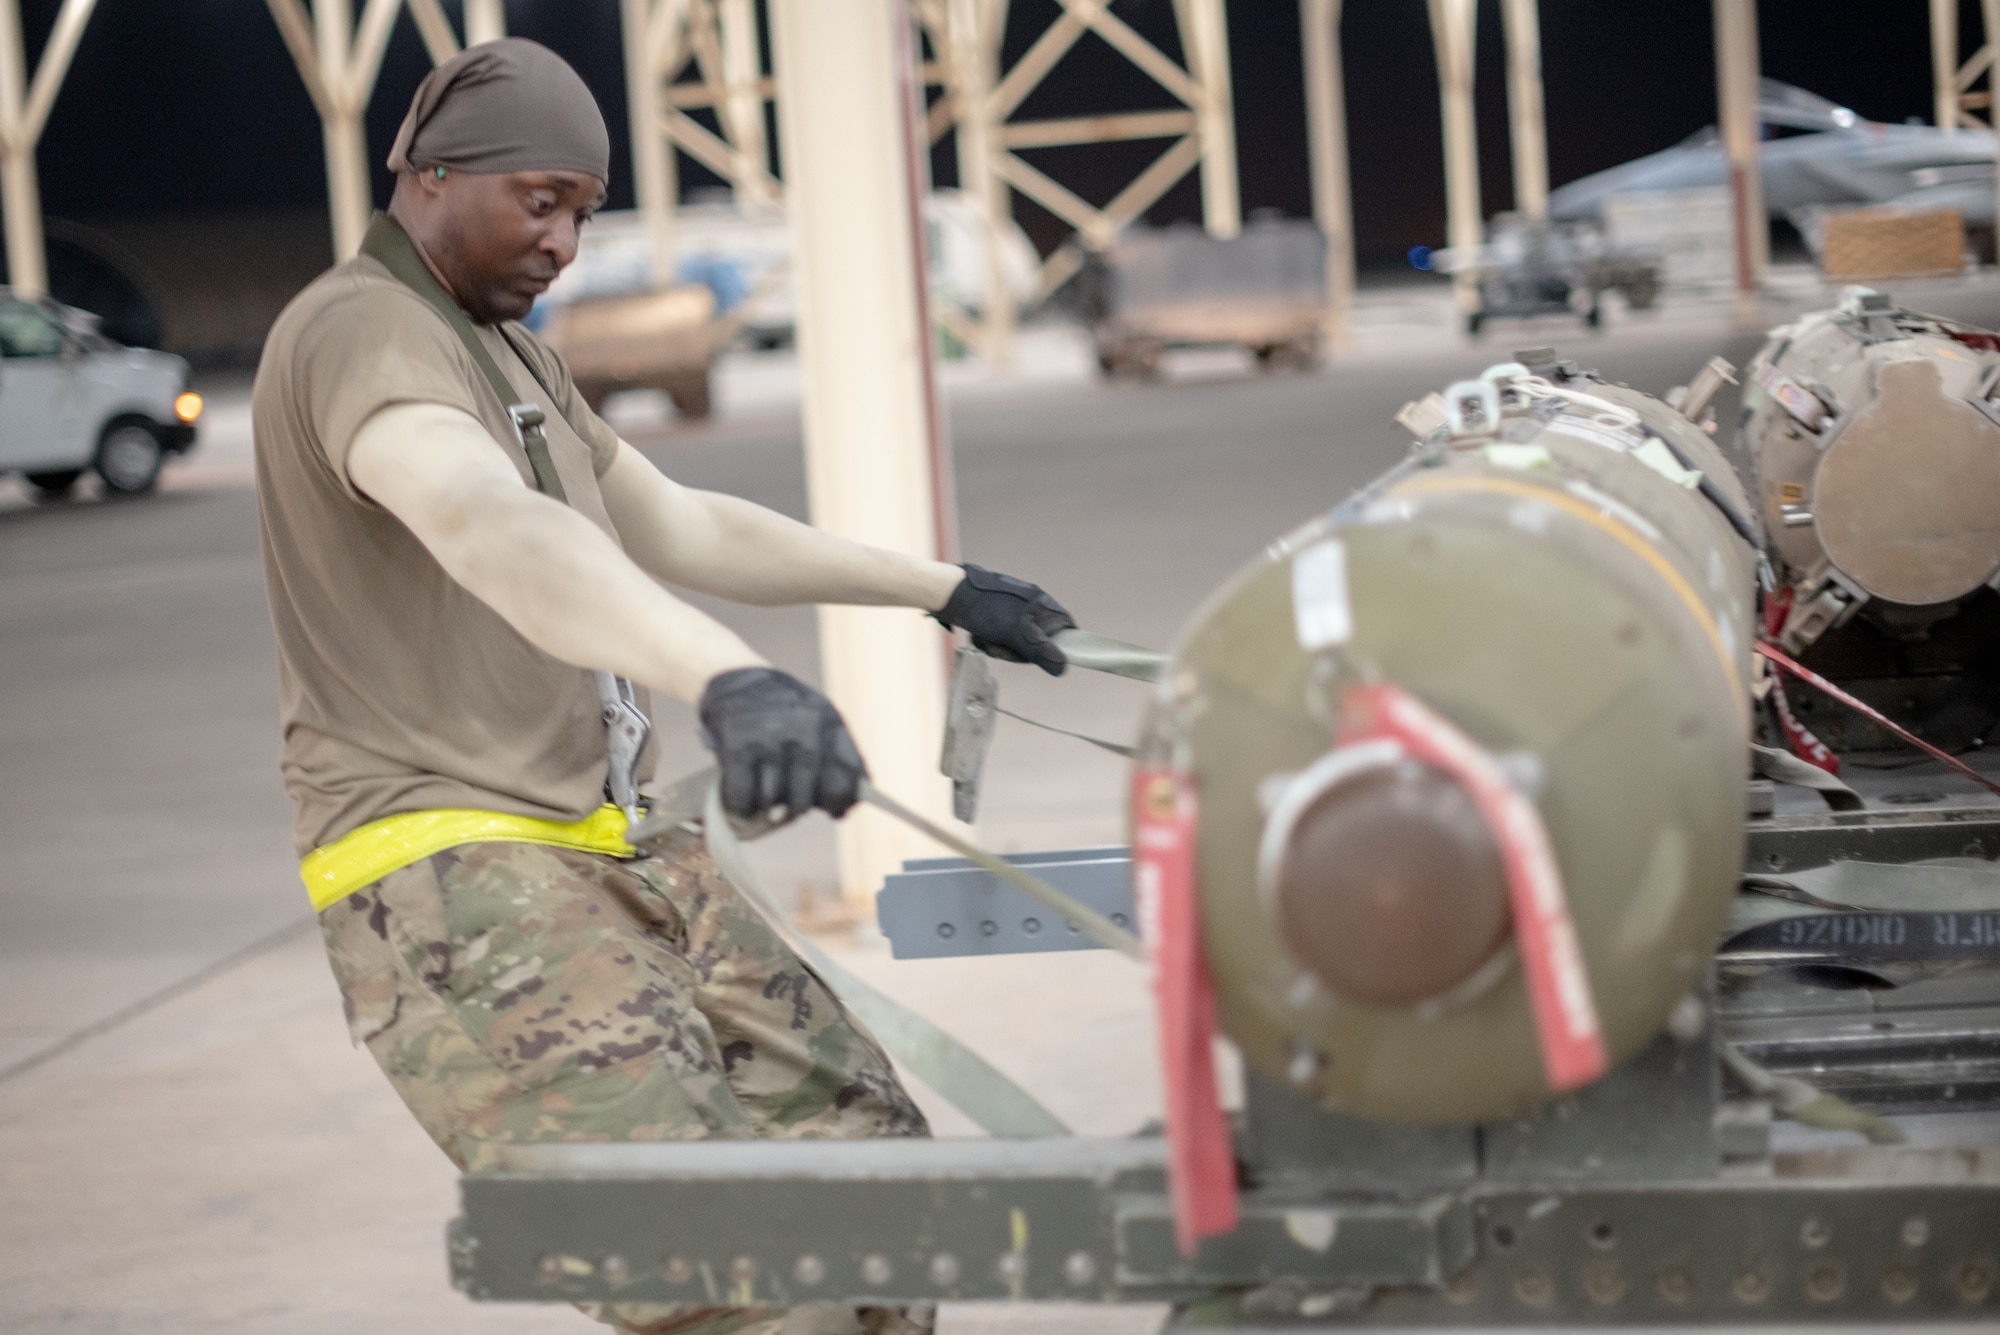 Staff Sgt. Kiefer May, 380th Expeditionary Aircraft Maintenance Squadron weapons load crew team chief, pulls a munition away from a trailer July 15, 2019, at Al Dhafra Air Base, United Arab Emirates. Weapons load crews work 24/7 operations to support loading and configuring various munitions for the F-35A Lightning II, F-15E Strike Eagle and F-15C Eagle jets at ADAB. (U.S. Air Force photo by Staff Sgt. Chris Thornbury)